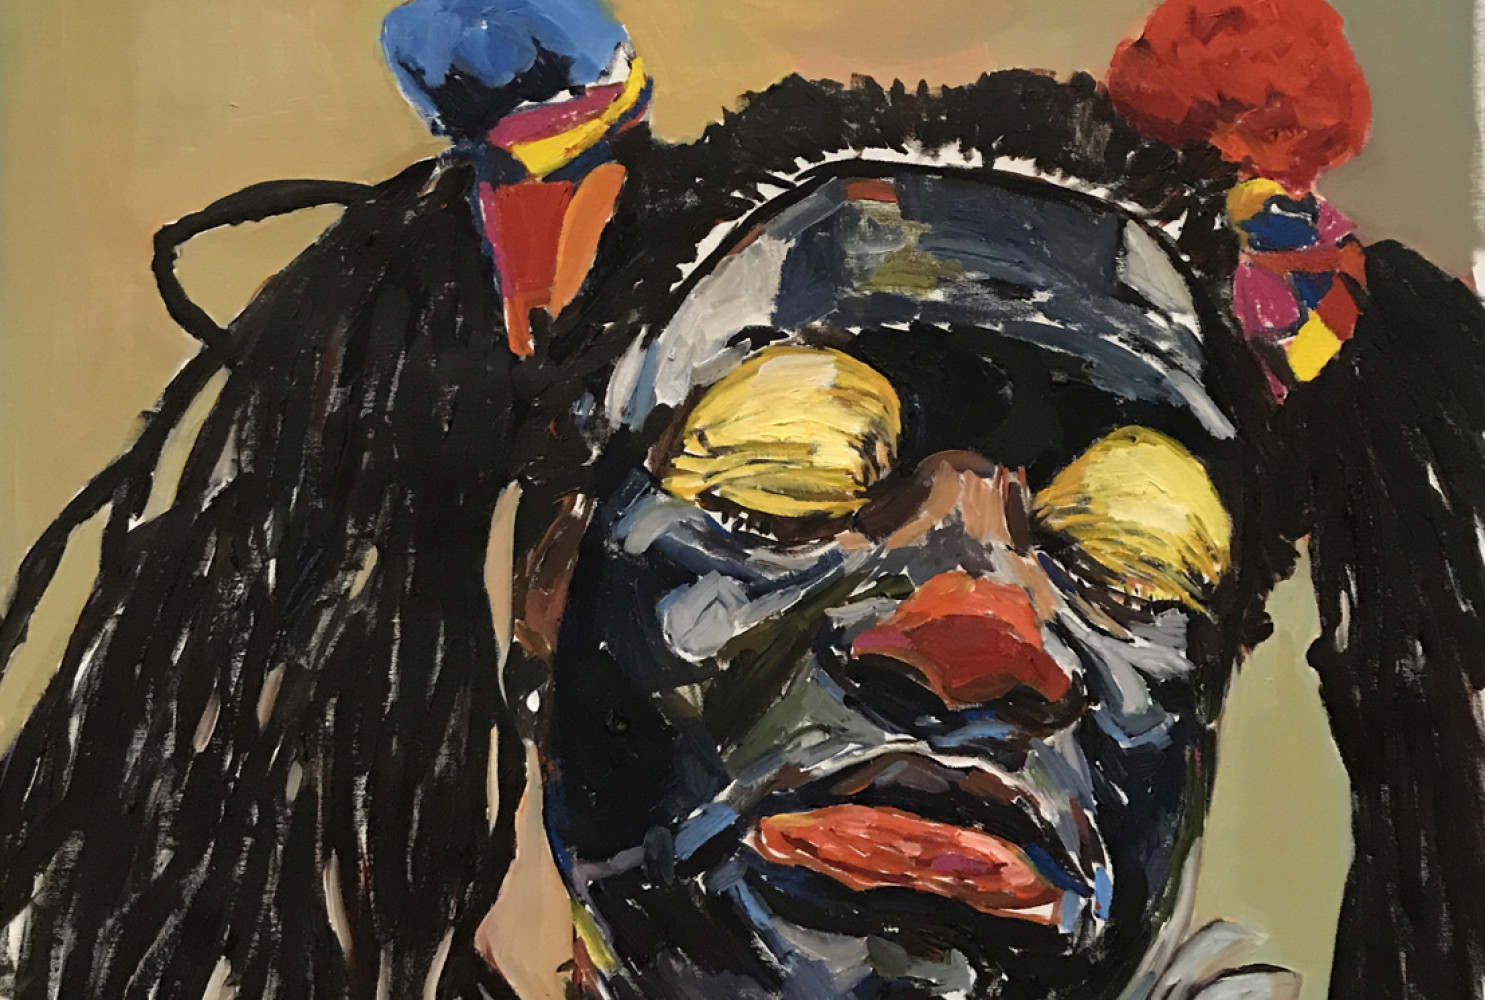 Clown Portrait, 2018, by Beverly McIver (American, b. 1962). Oil on canvas, 45 x 34 inches. Collection of Billie Tsien and Tod Williams, New York.
